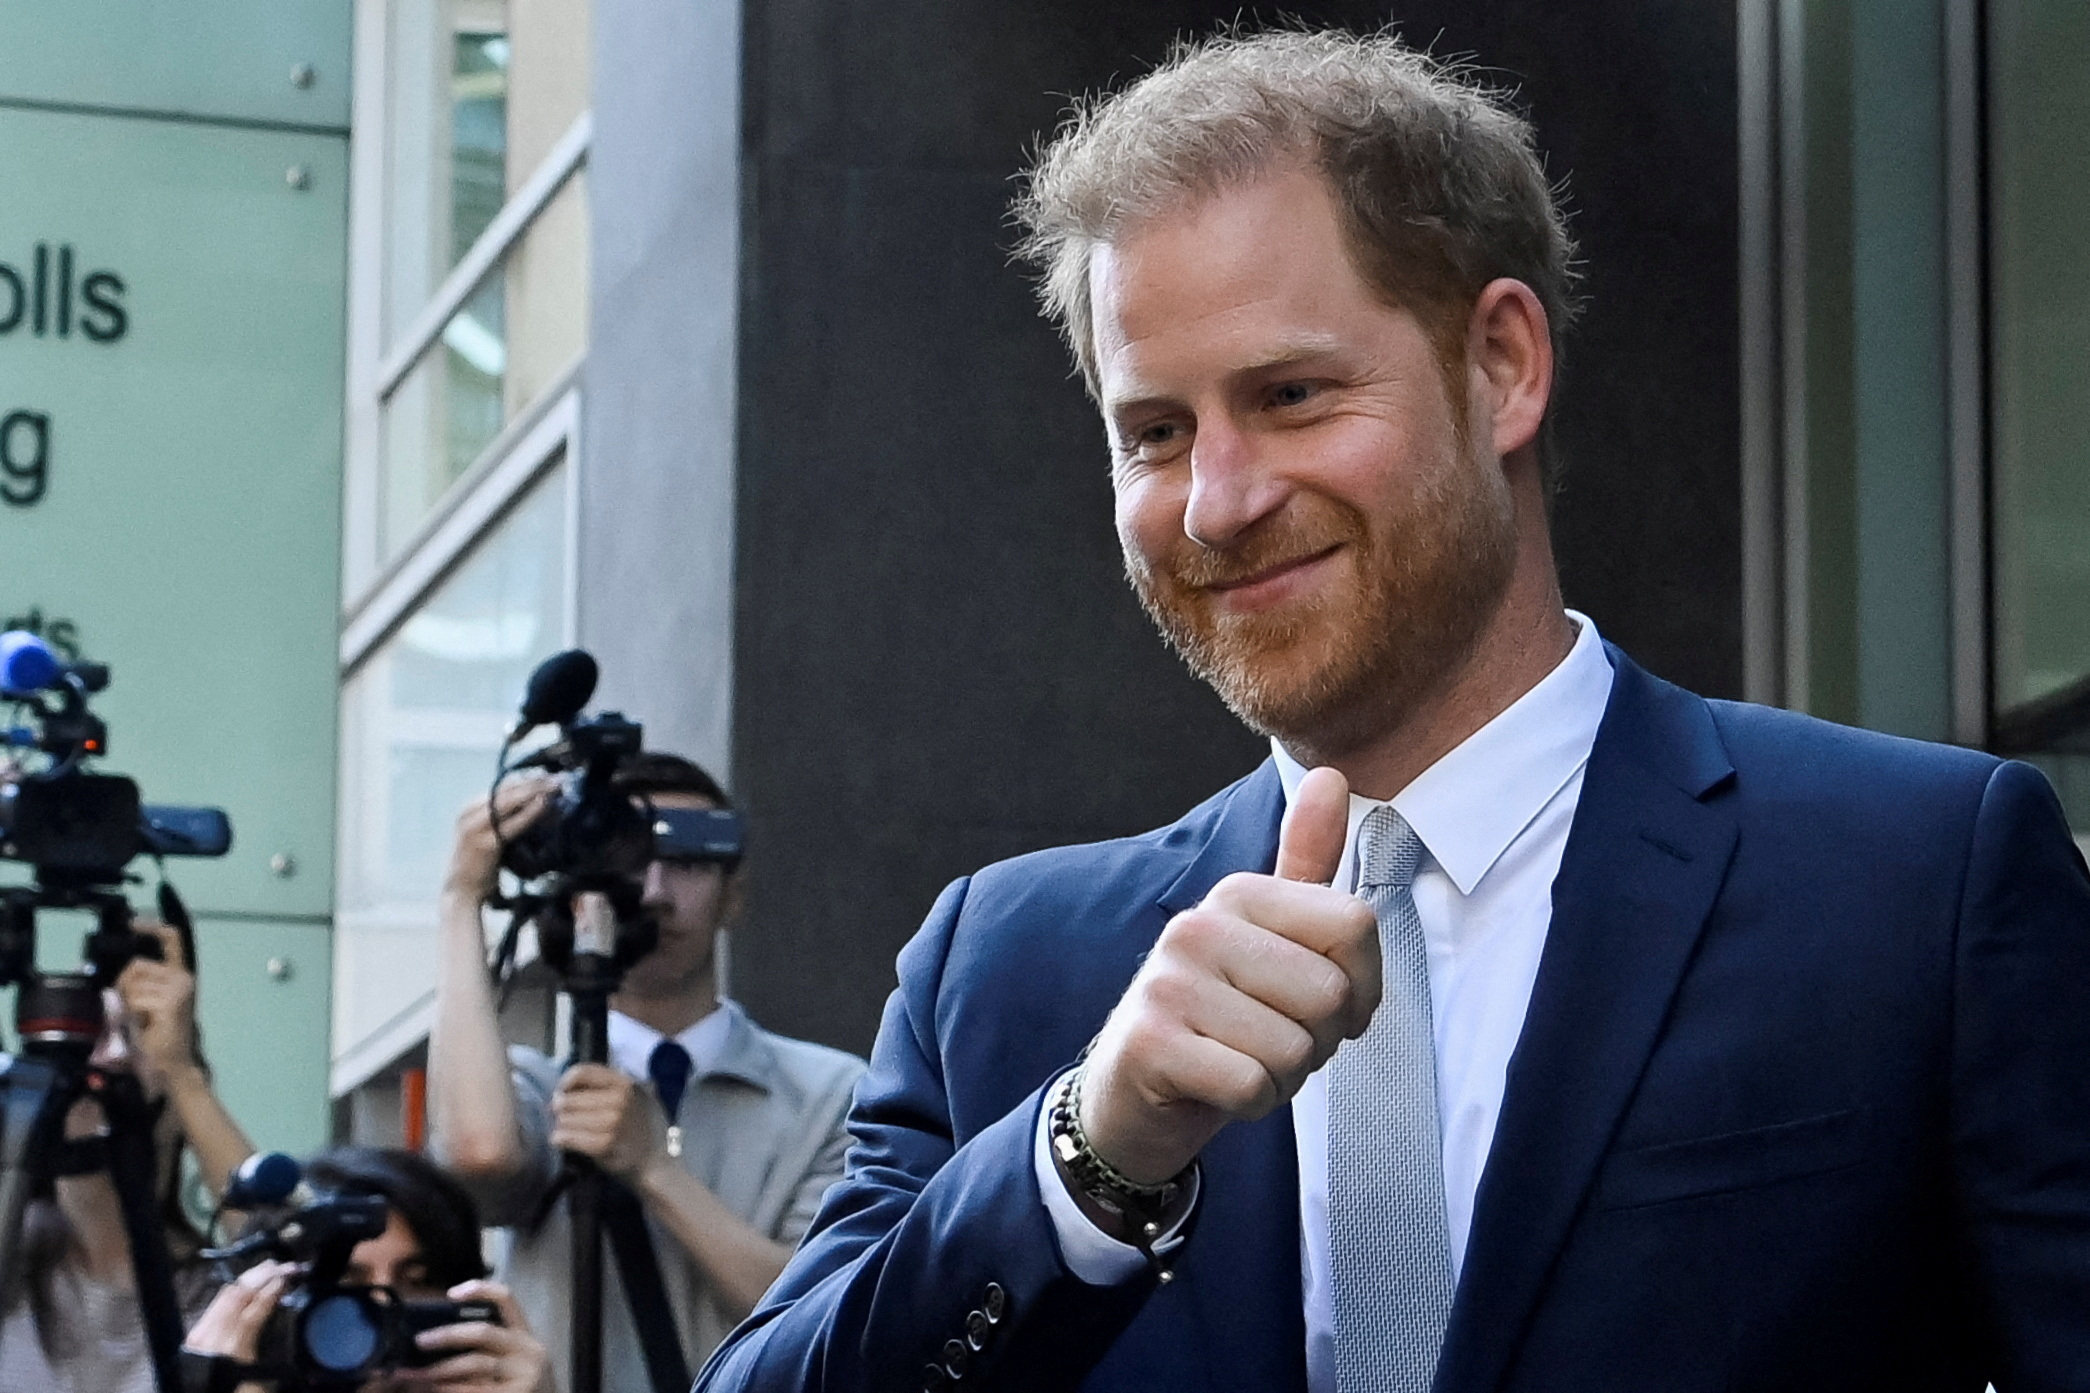 Britain’s Prince Harry is expected to attend a service at St Paul’s Cathedral in London on May 8 to celebrate the Invictus Games. Photo: Reuters